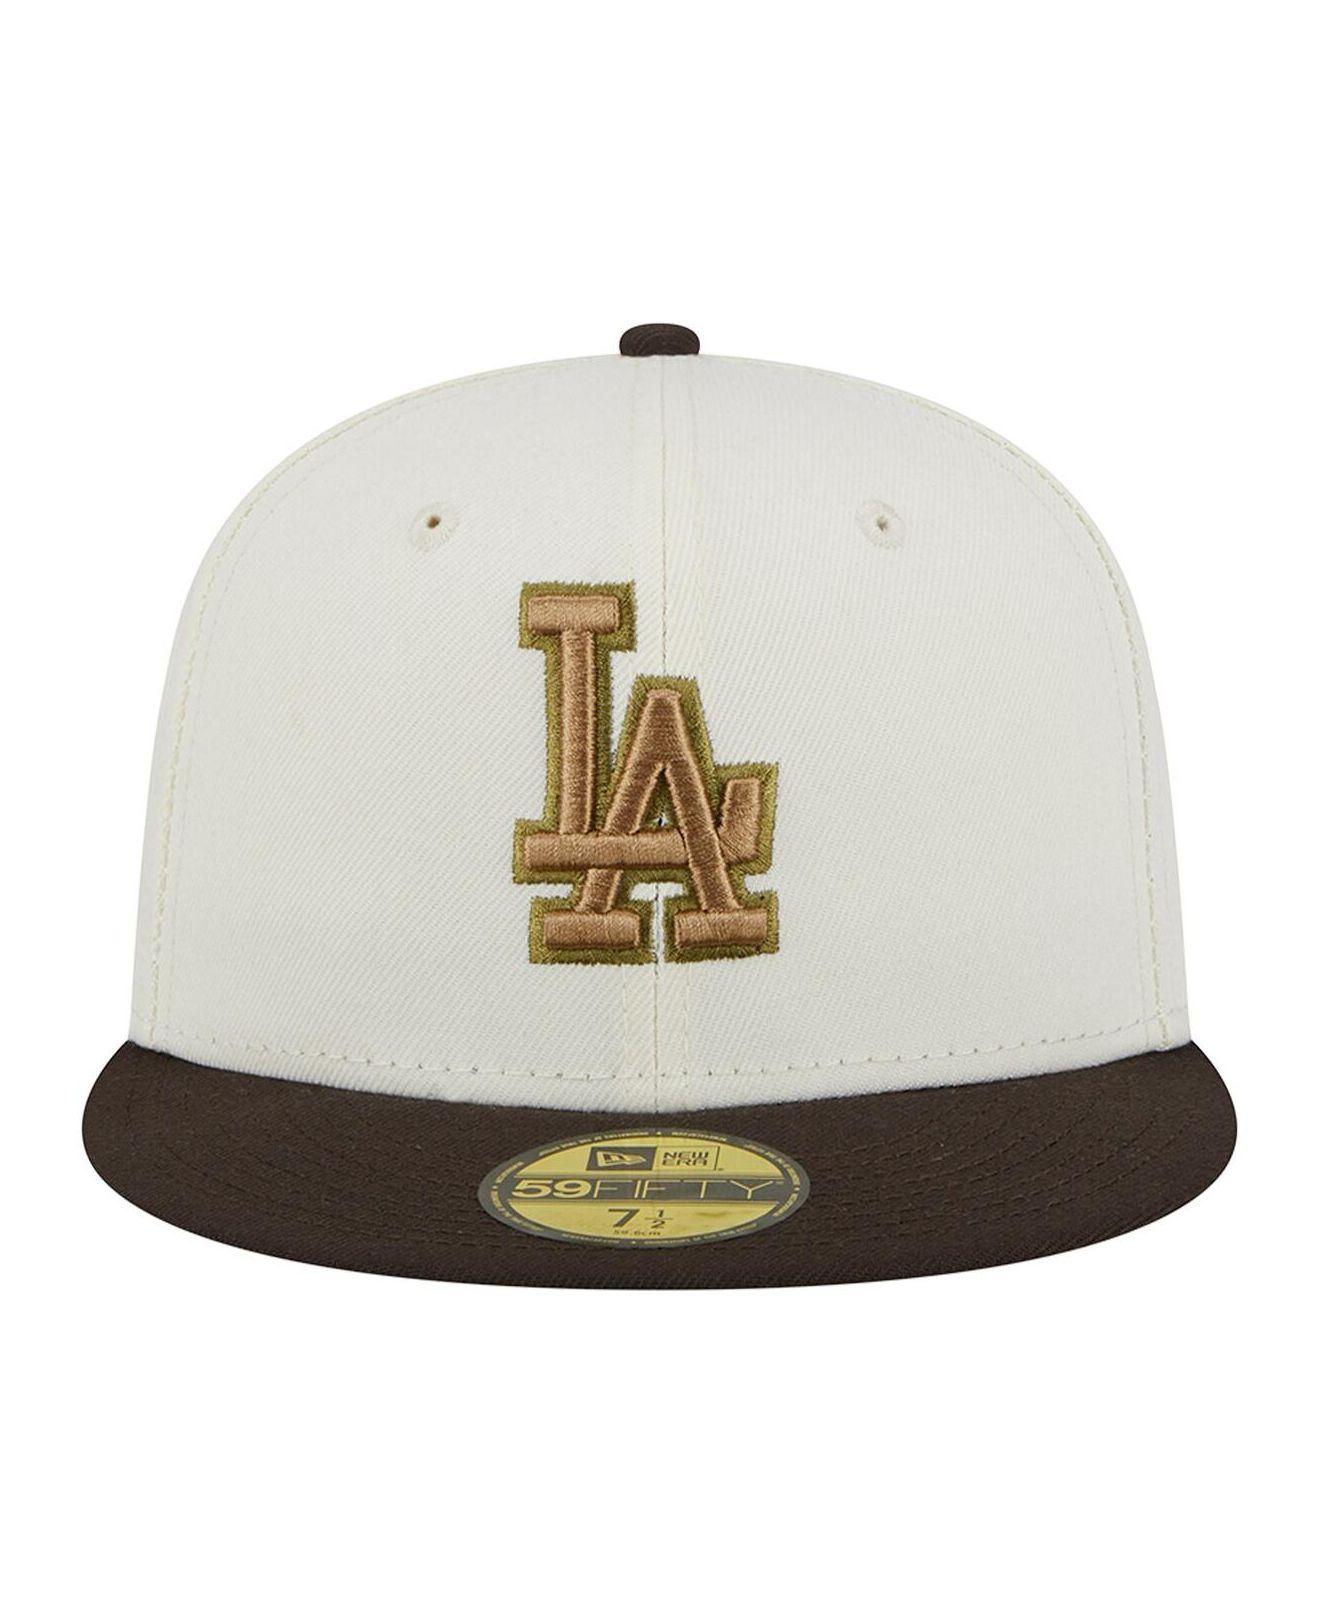 California Angels New Era Optic 59FIFTY Fitted Hat - White/Navy